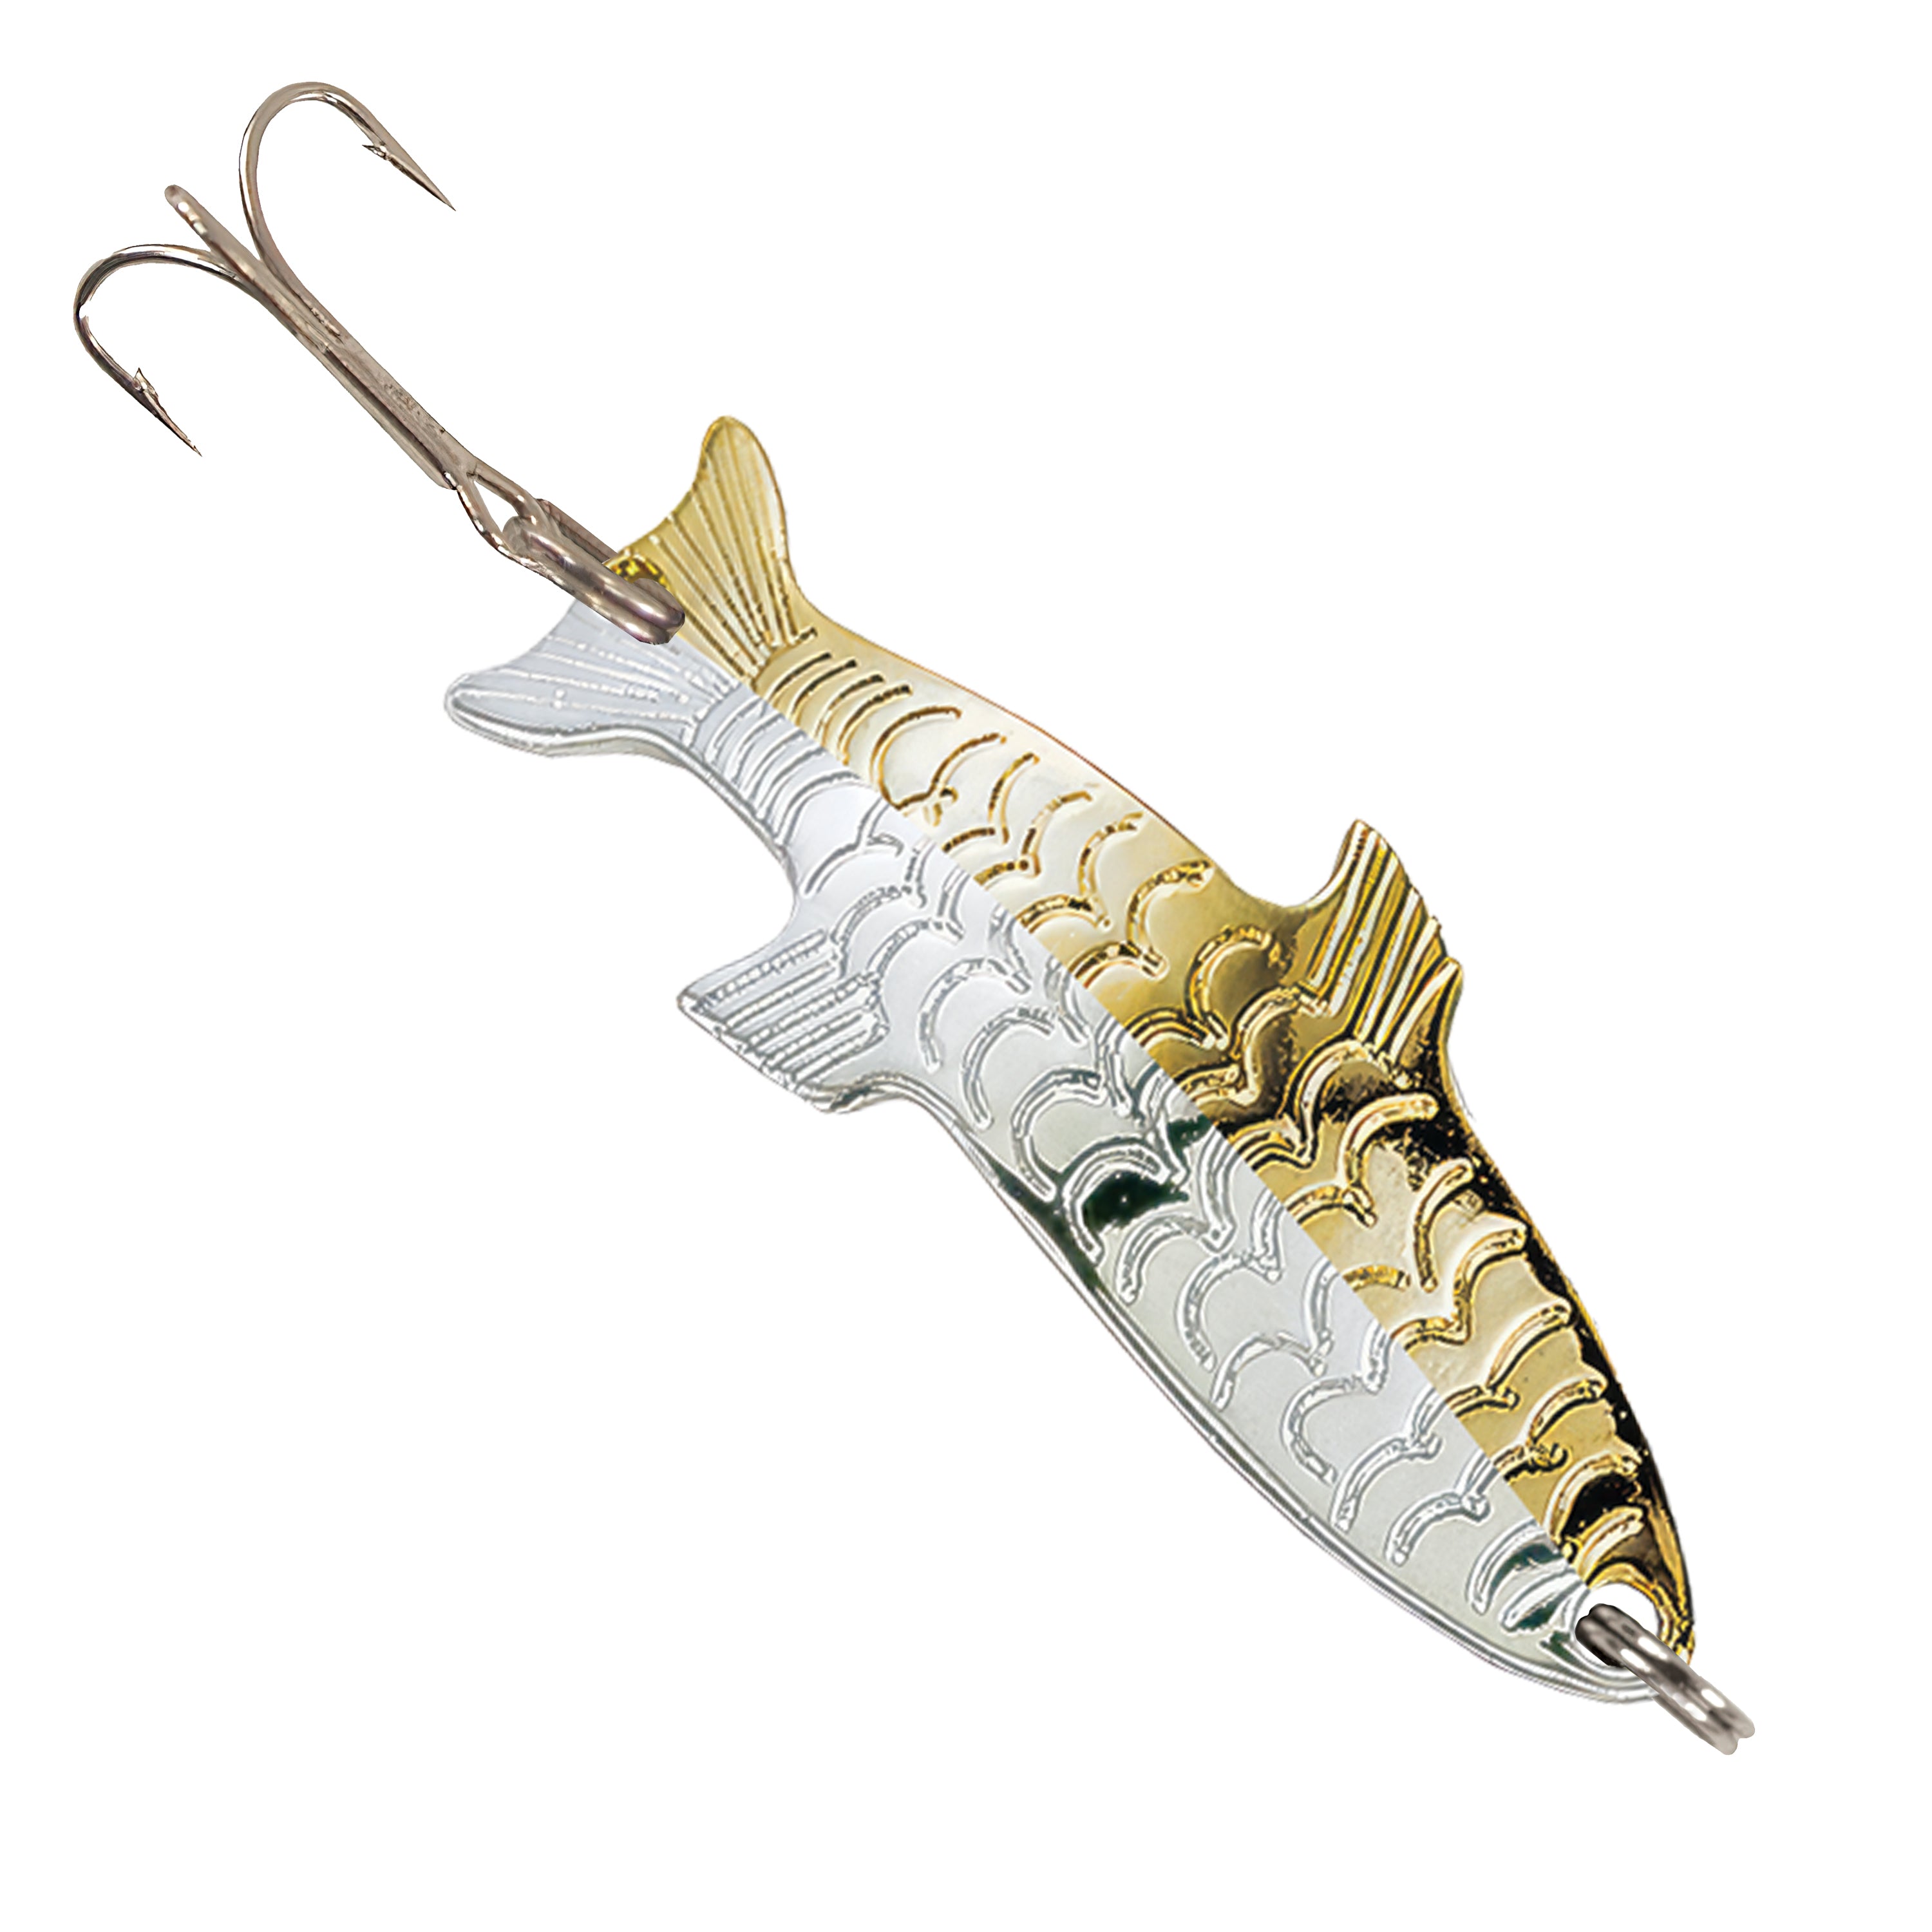 Acme Fishing Lure S304/G Phoebe Spoon 2 1/4 Gold